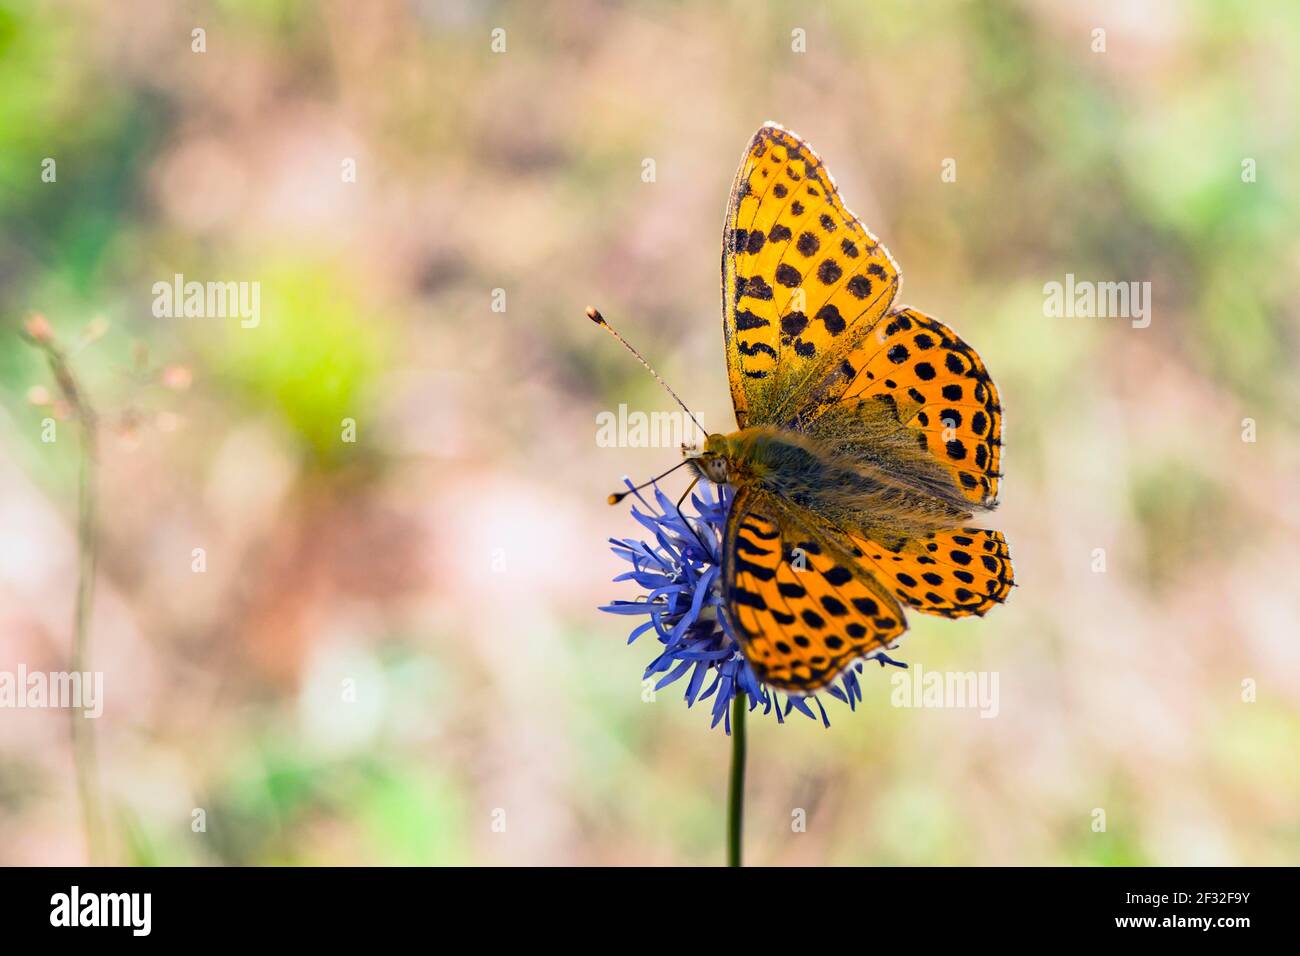 Queen of Spain fritillary (Issoria lathonia) butterfly, butterfly, Mecklenburg-Vorpommern, Germany Stock Photo